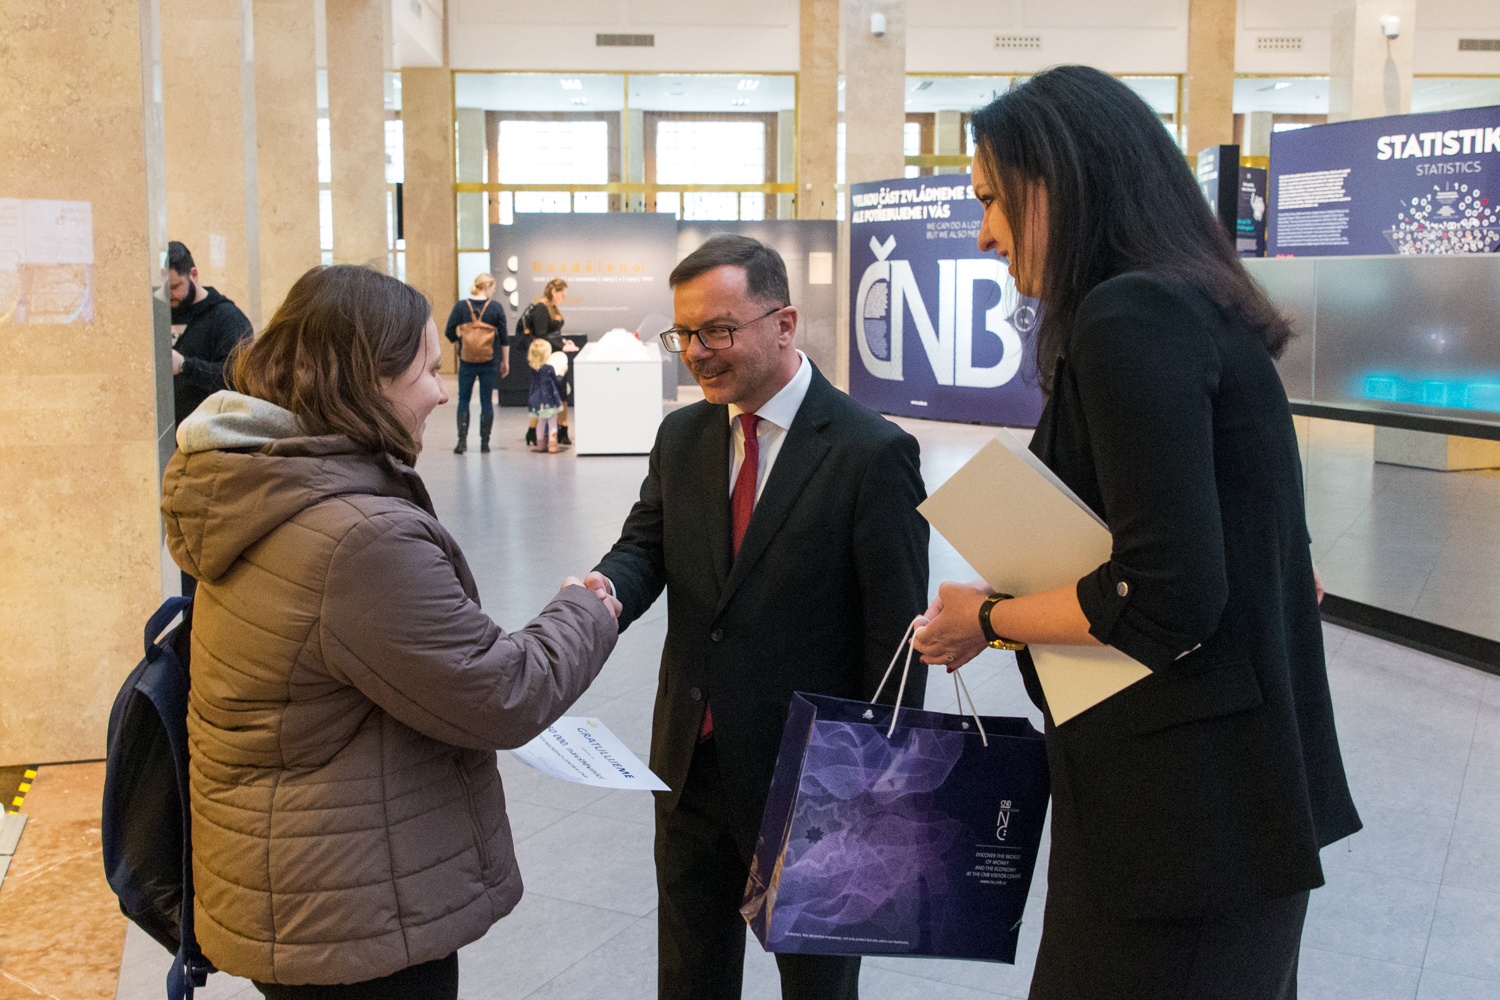 CNB Visitor Centre welcomes its 50,000th visitor